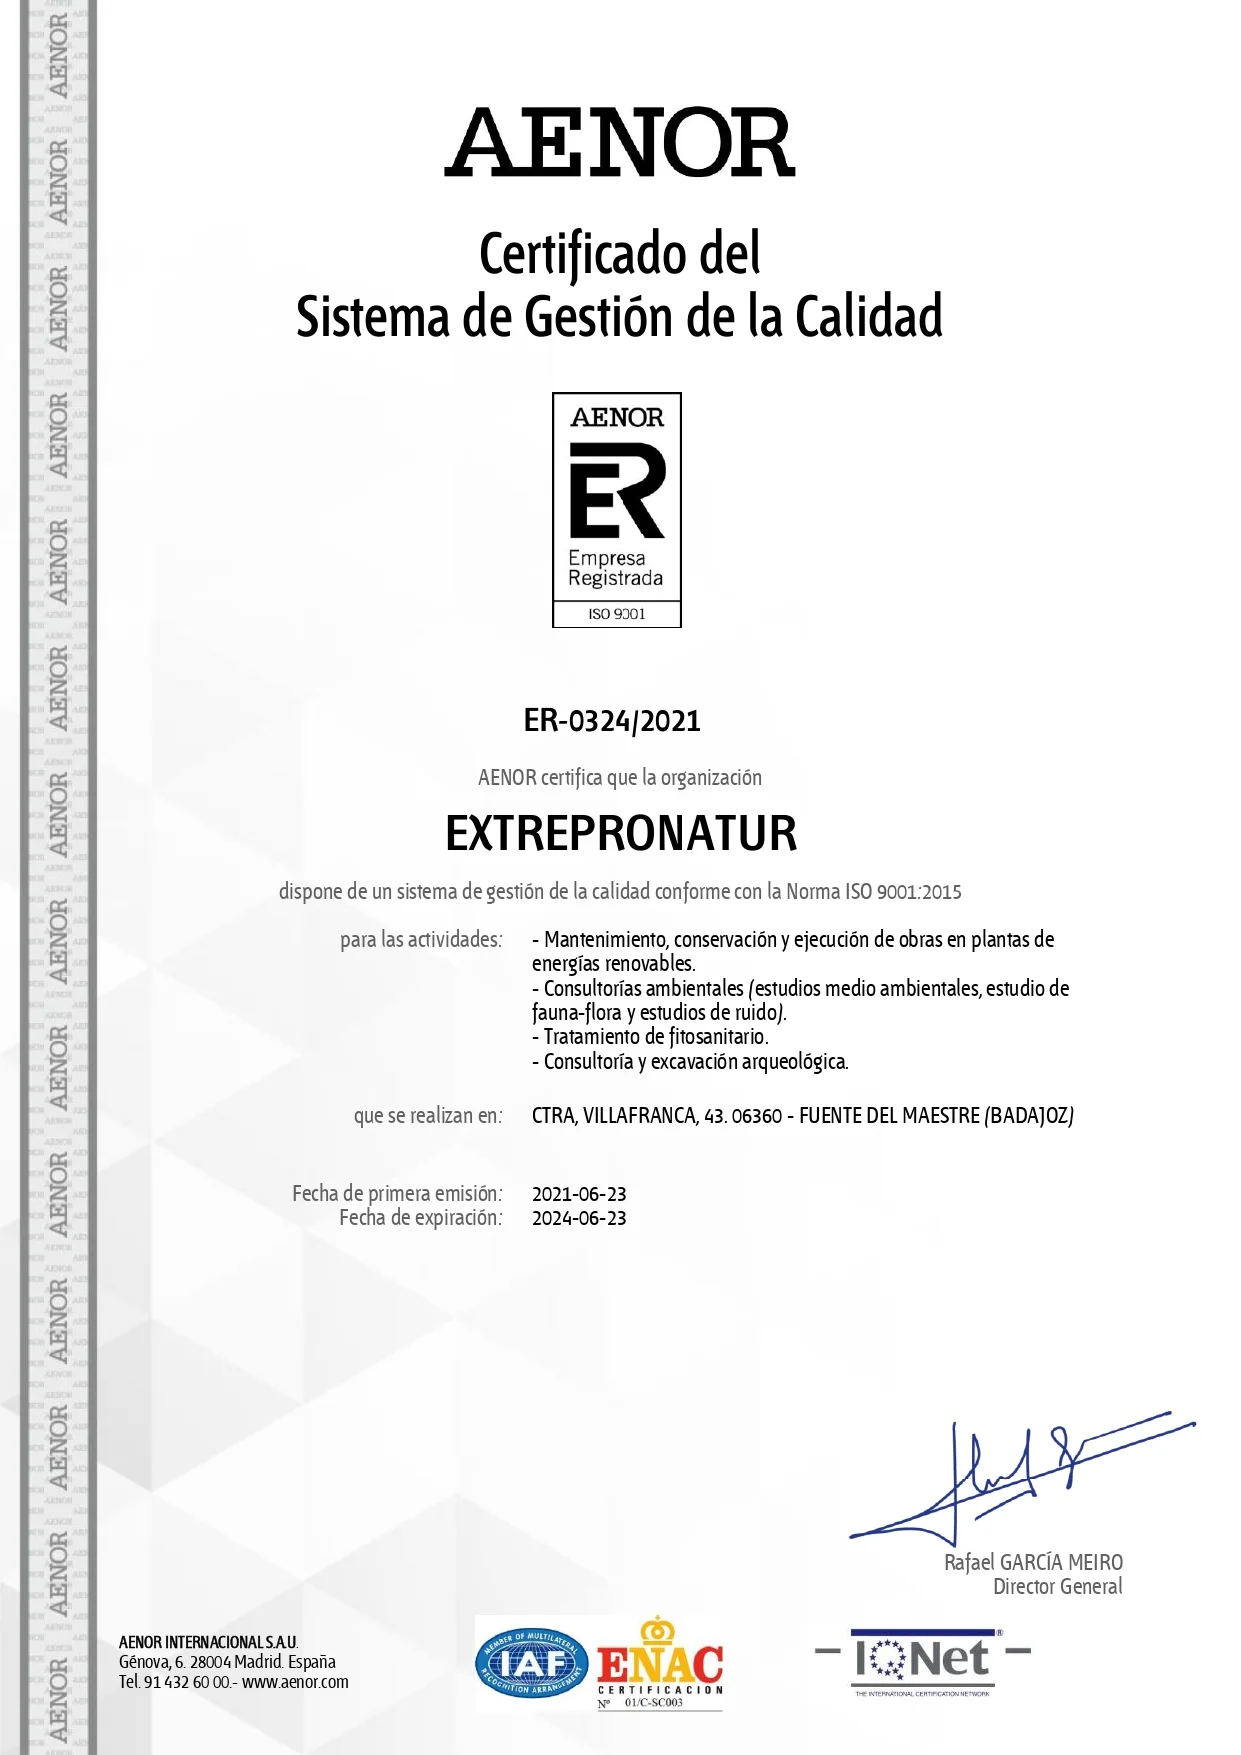 ISO 9001-2015 Aenor Quality Certificate